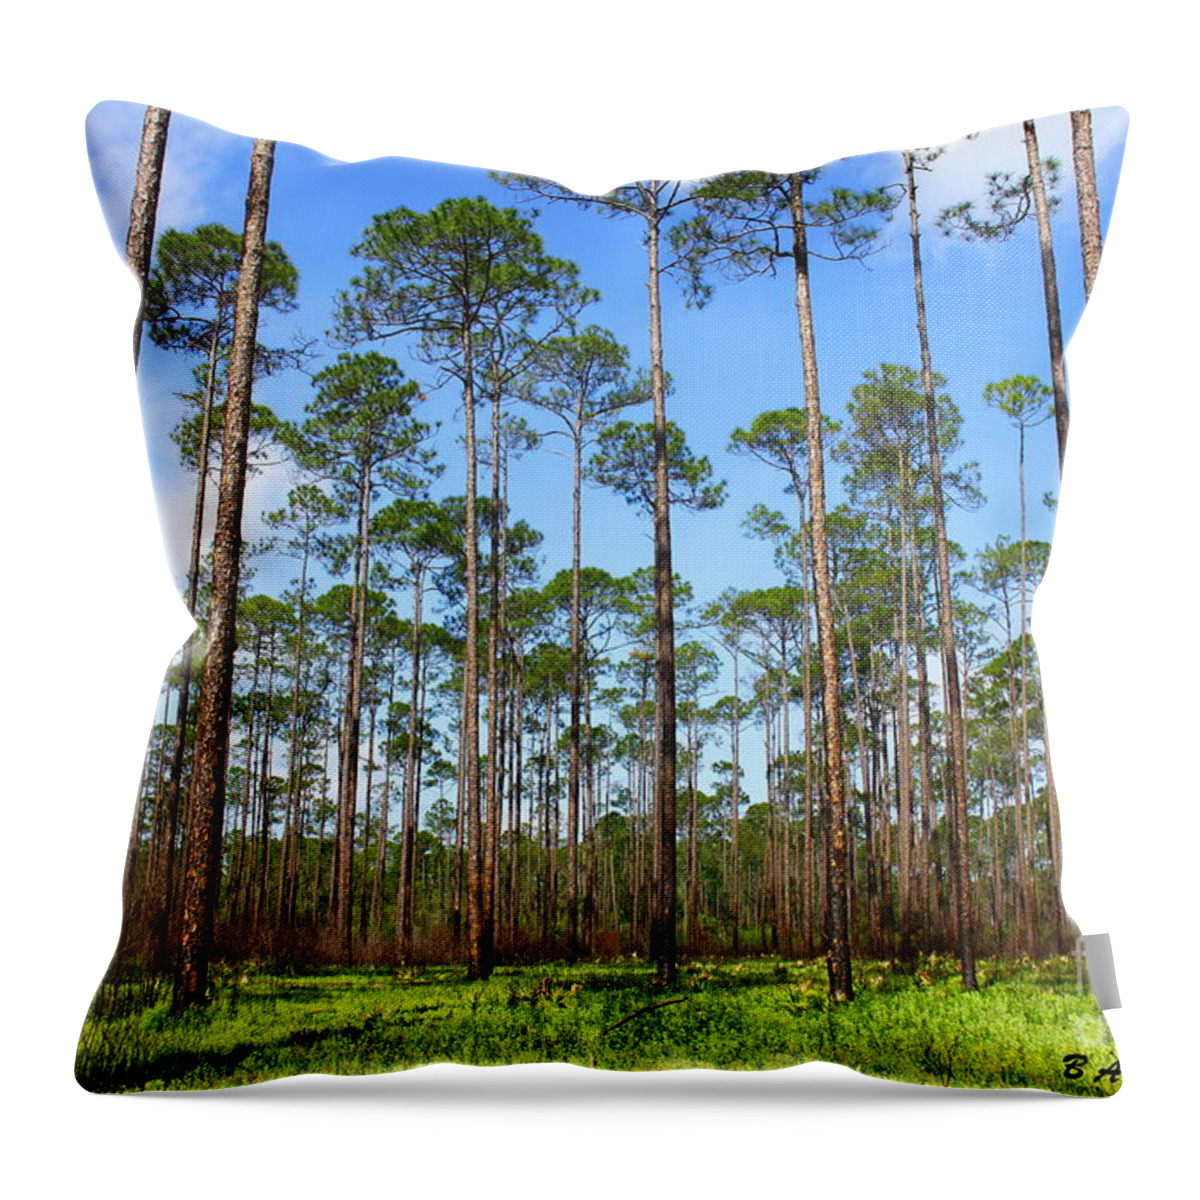 Appalachicola National Forest Throw Pillow featuring the photograph Appalachicola National Forest by Barbara Bowen